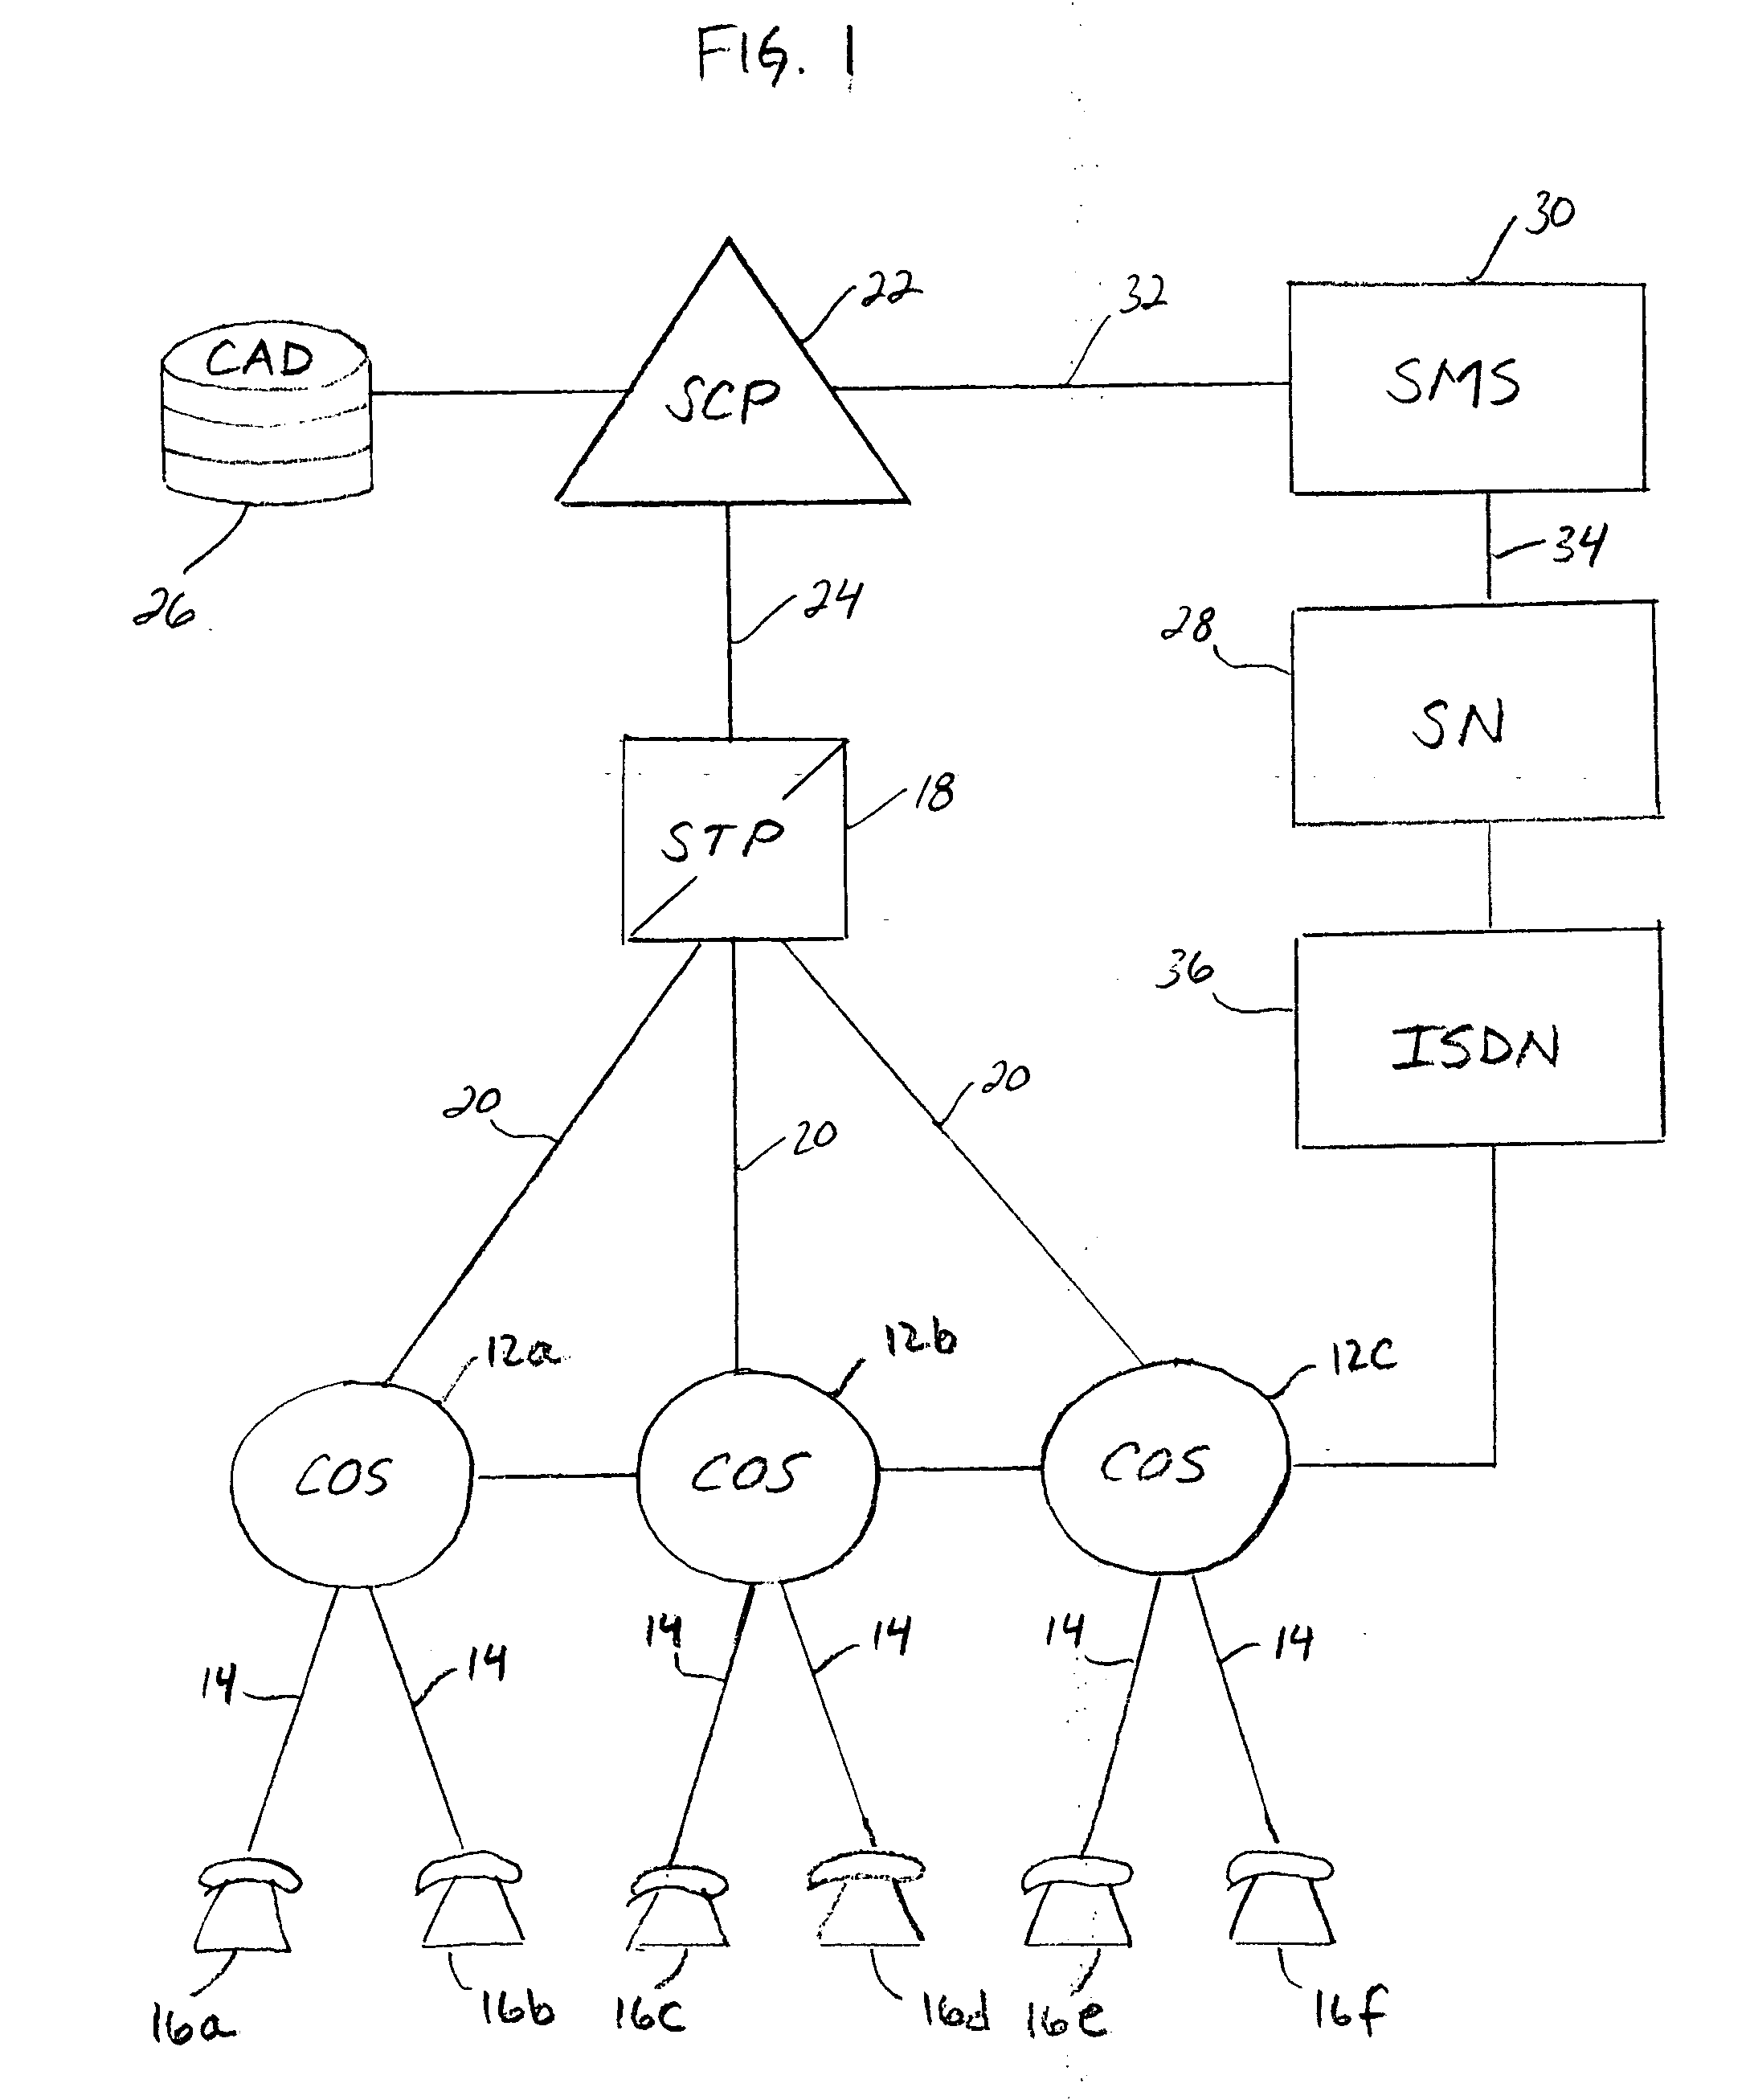 Method and system for selectable call termination attempt notification and blocking